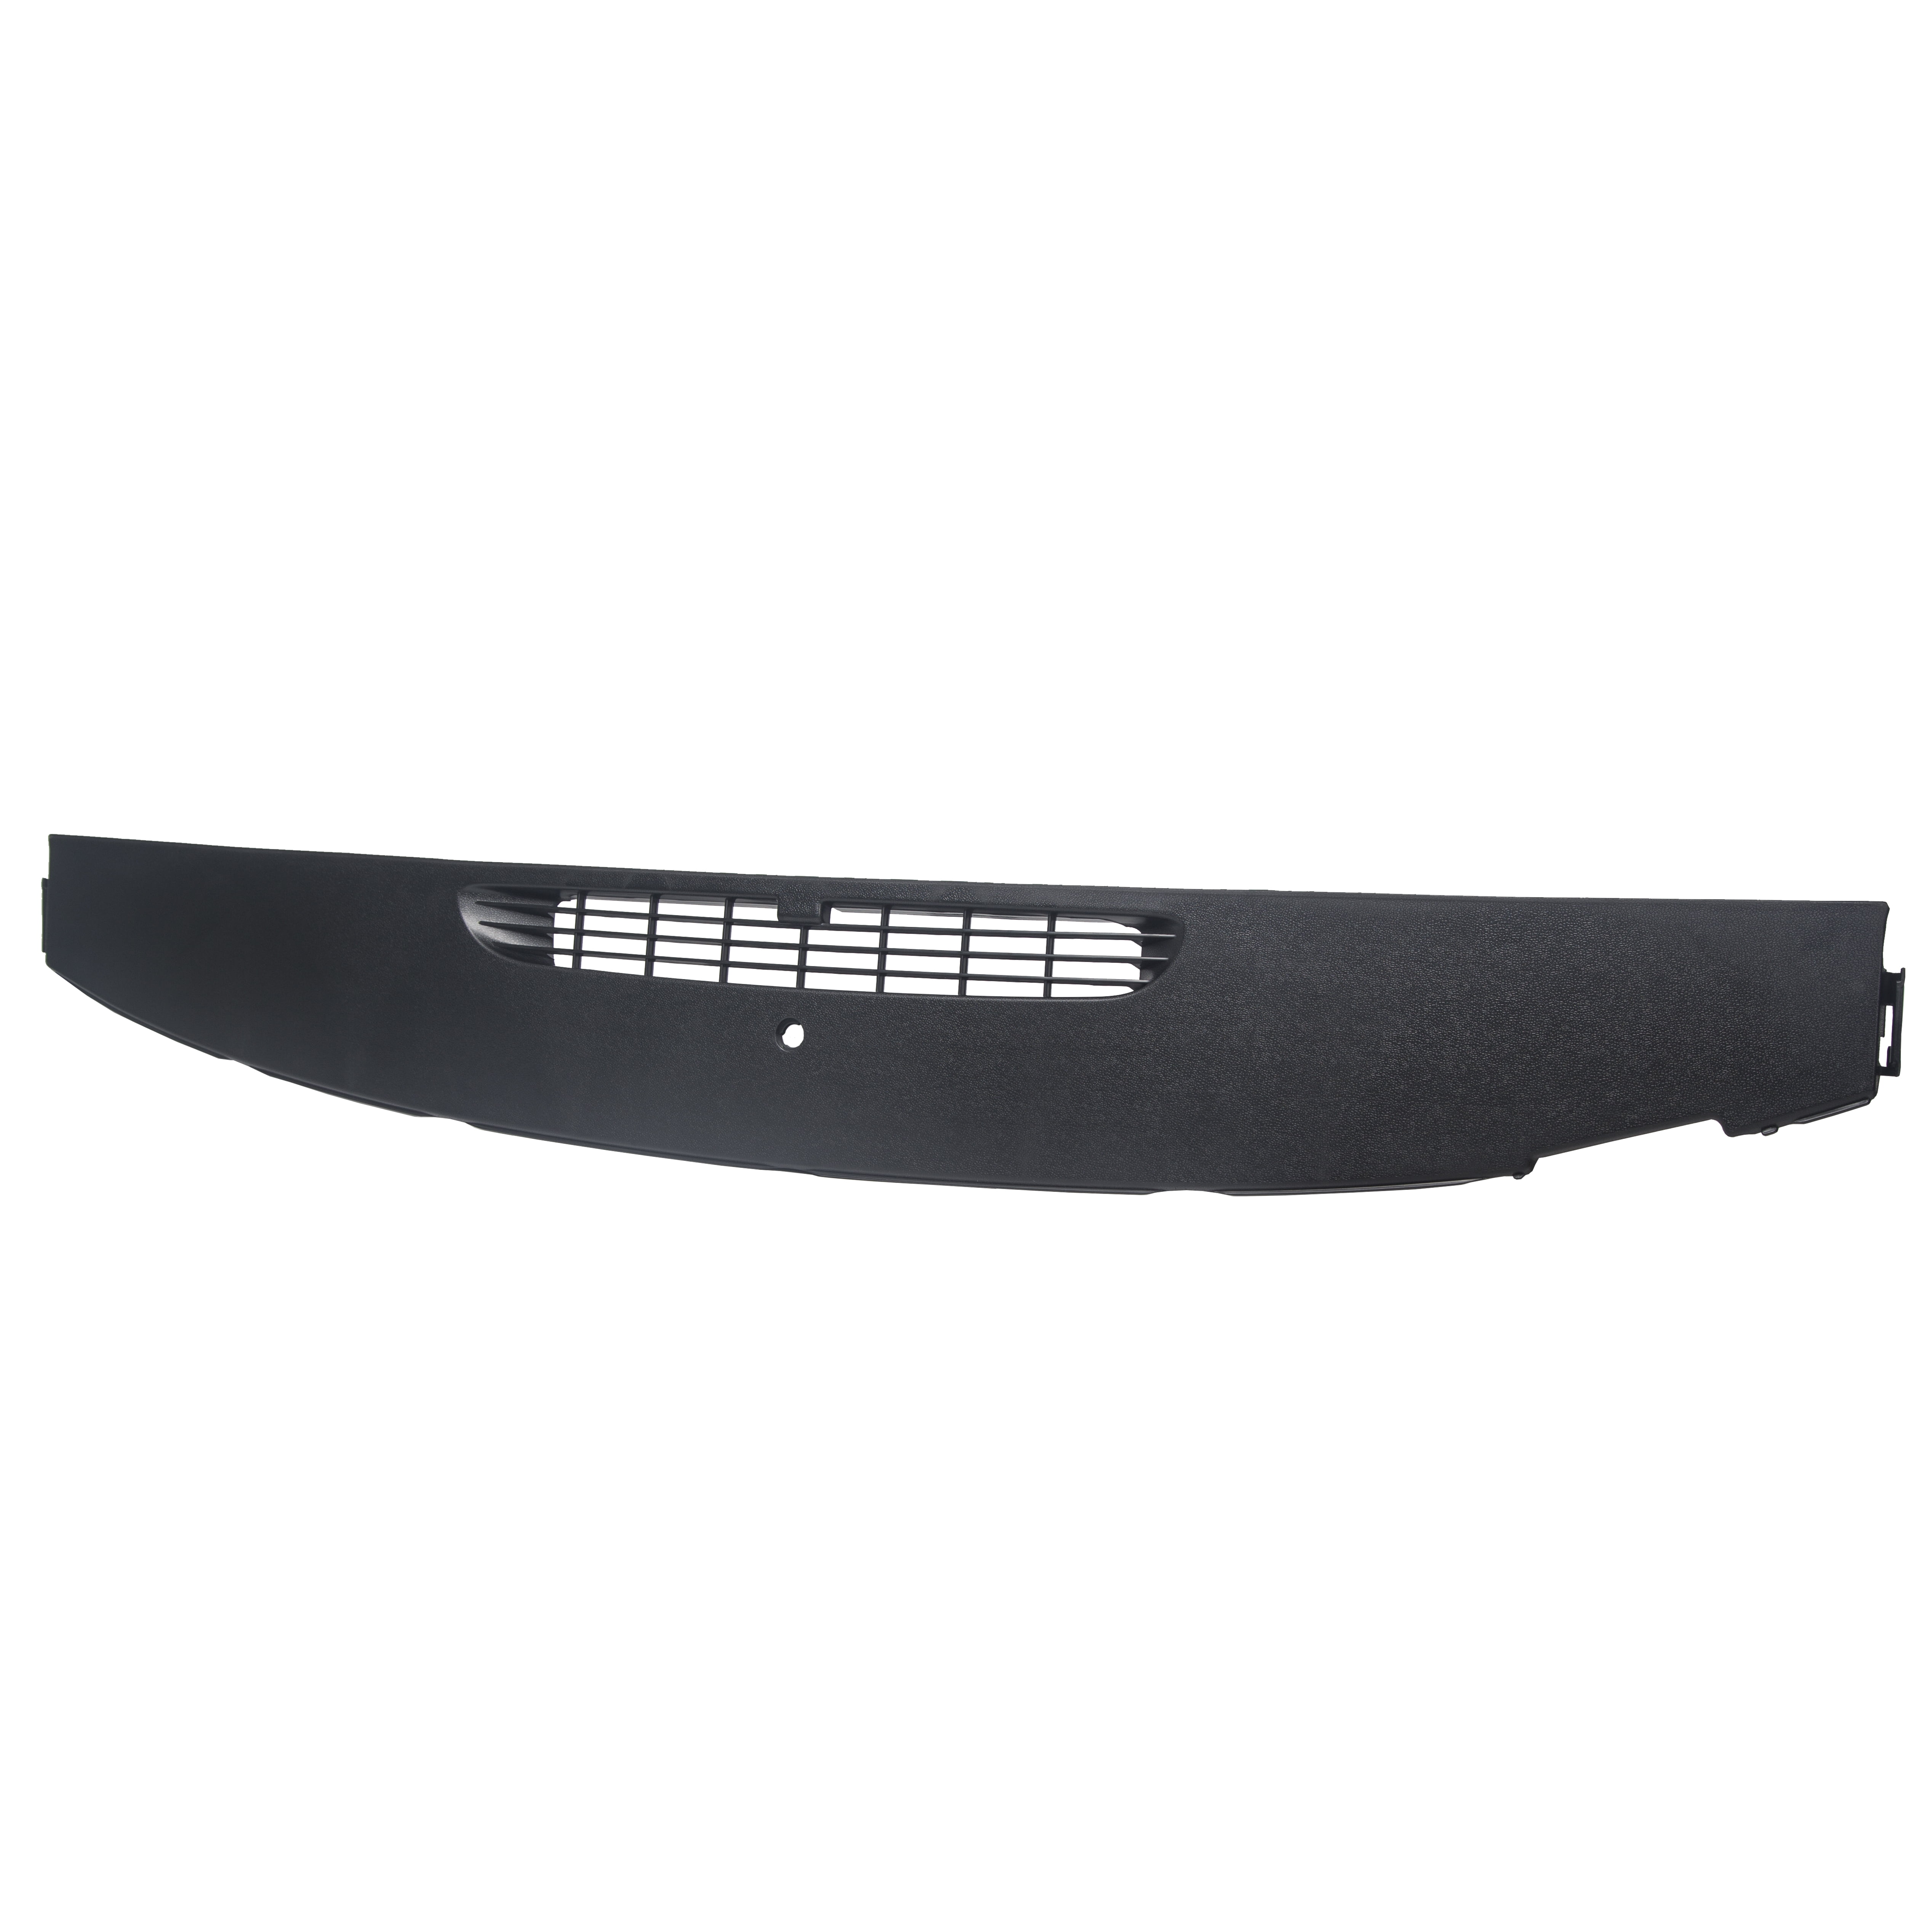 Coverlay ® Dash Cover and Vent Cover Installation for 07-13 Chevy/GMC  Trucks&SUVs. 18-205 & 18-205V 